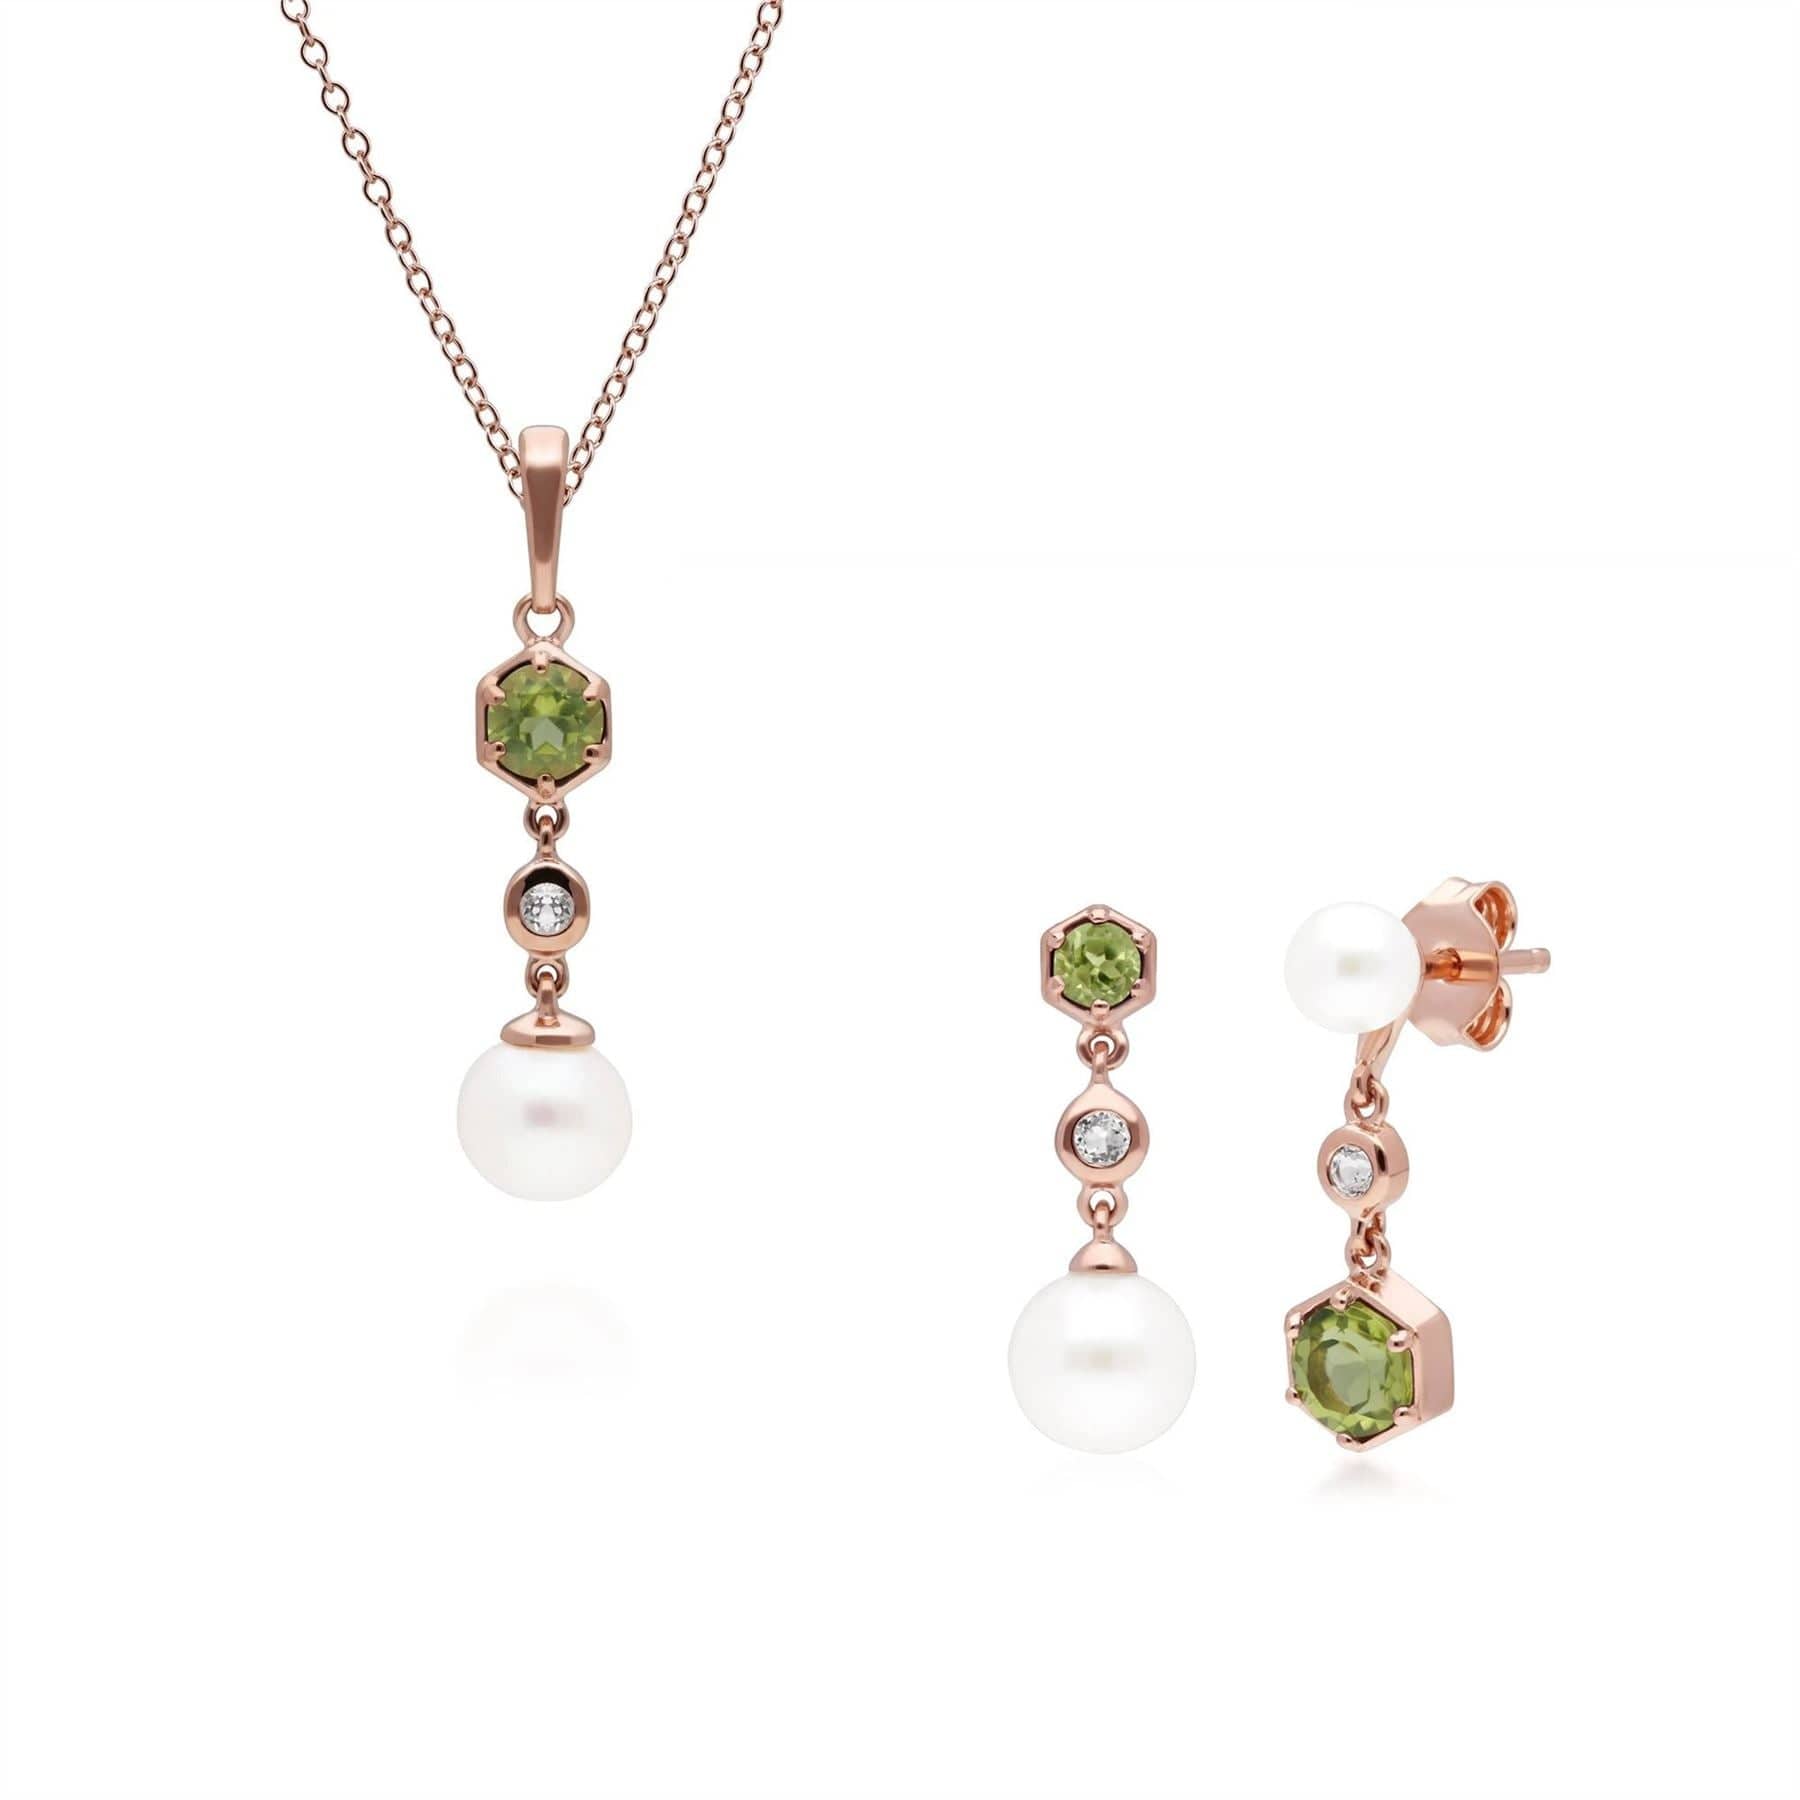 270P030306925-270E030306925 Modern Pearl, Peridot & Topaz Pendant & Earring Set in Rose Gold Plated Silver 1